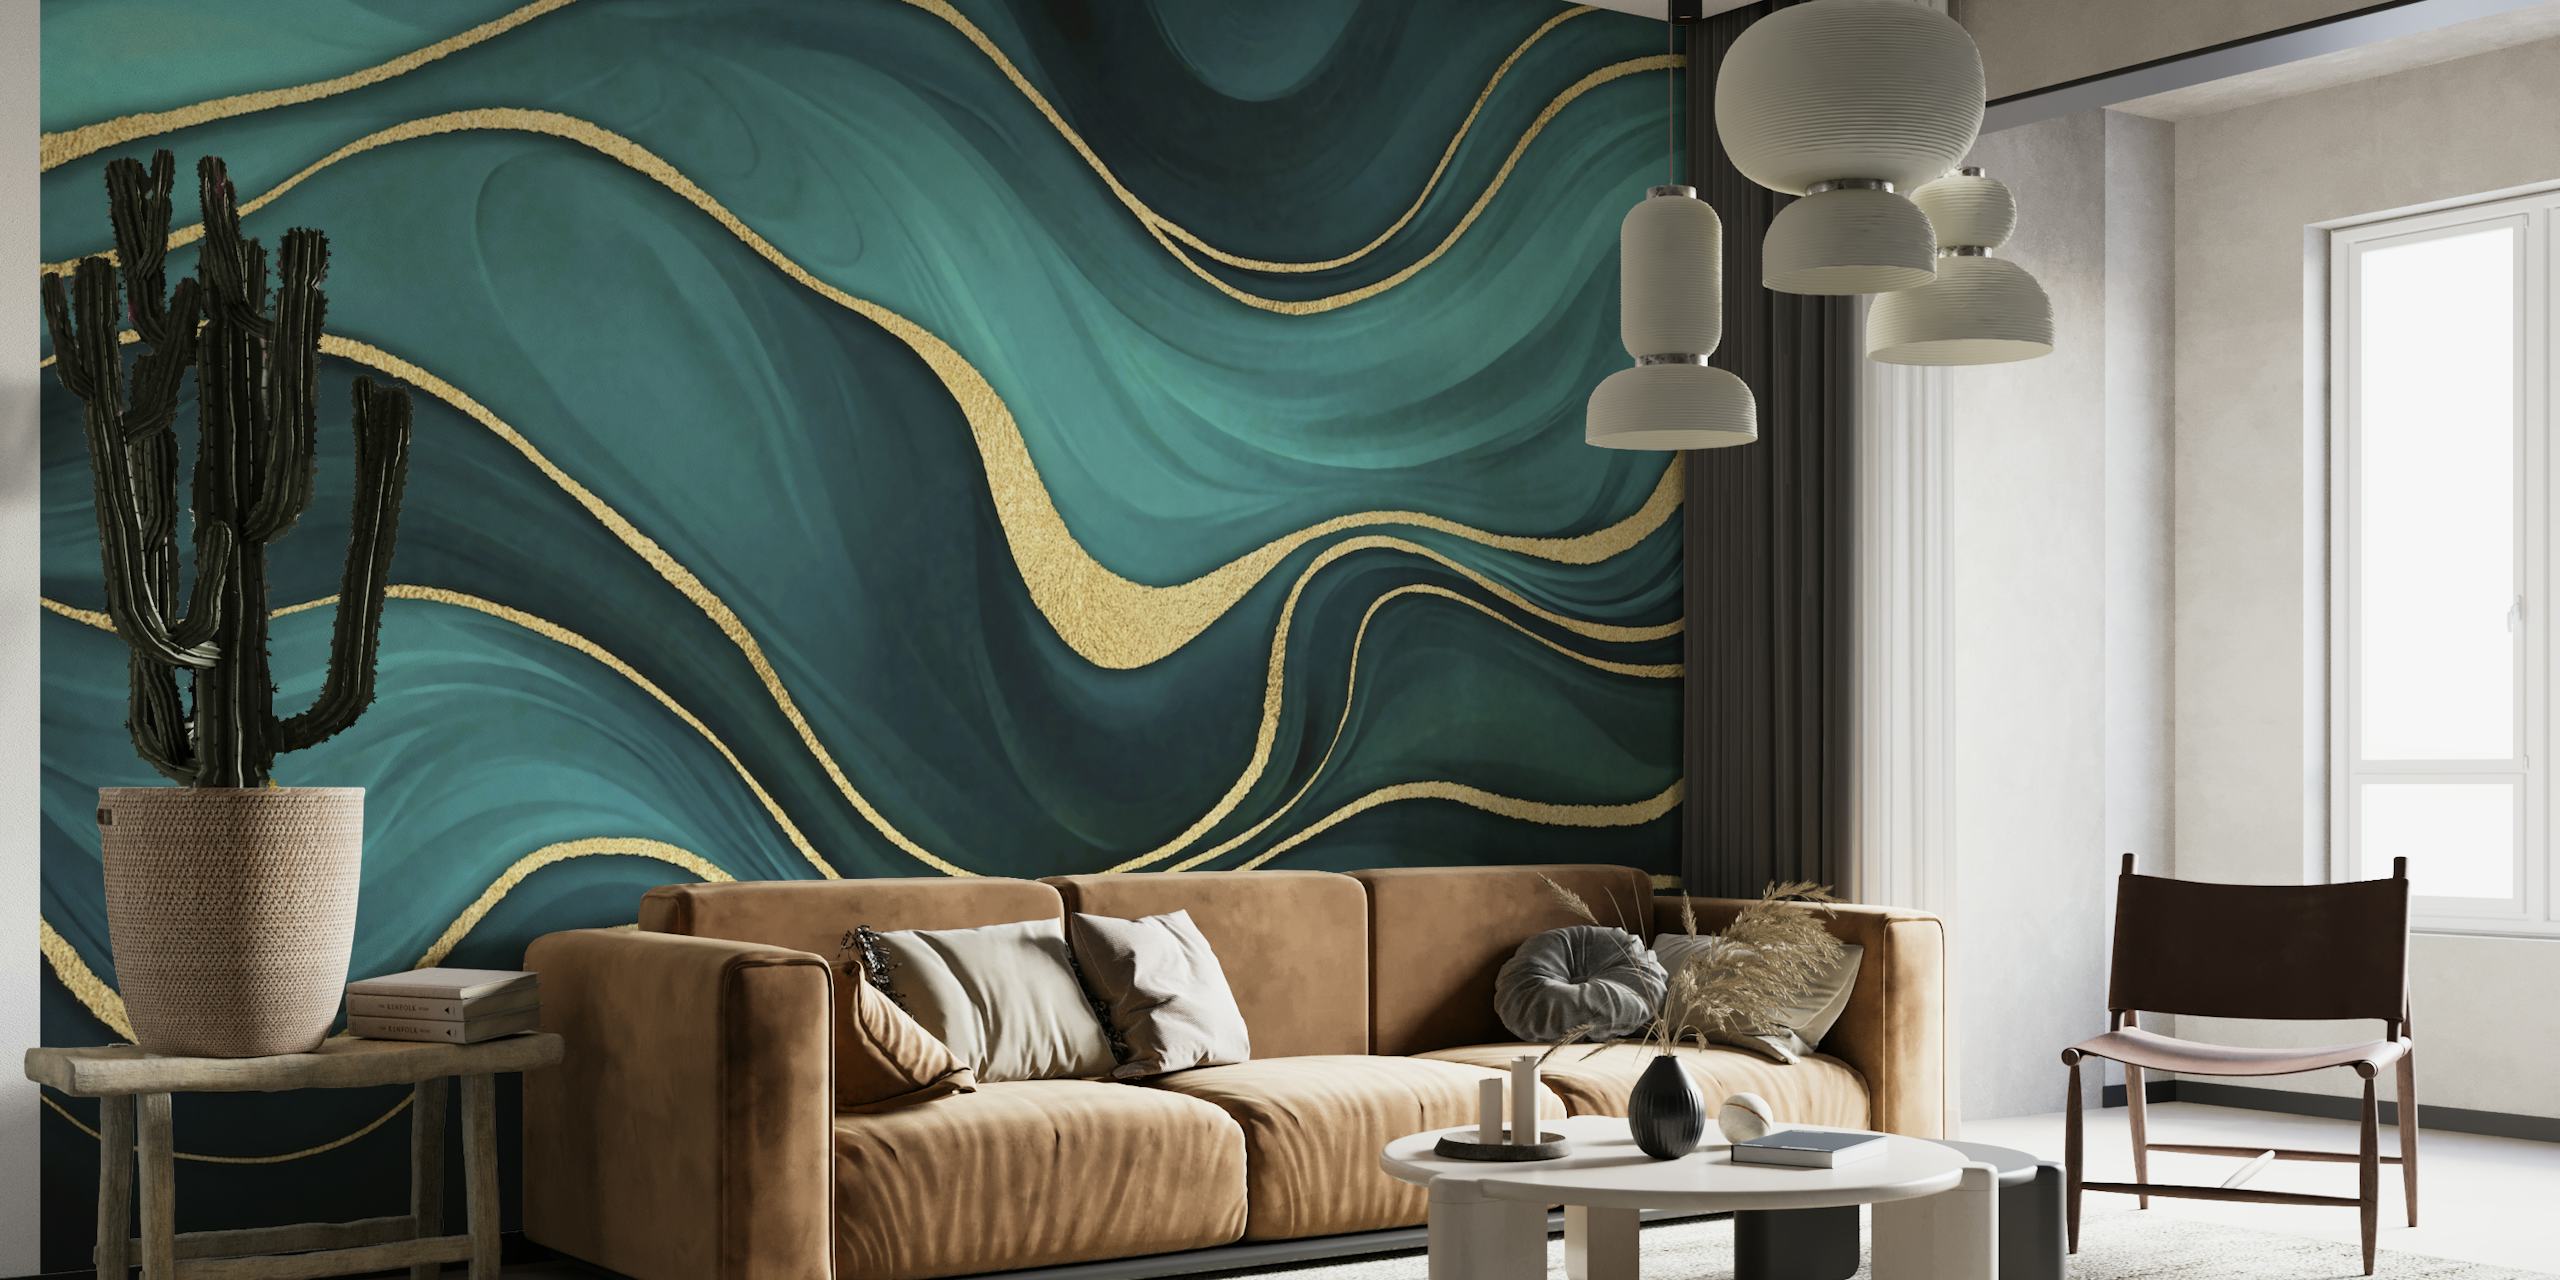 Luxury Marble Teal Turquoise With Gold ταπετσαρία